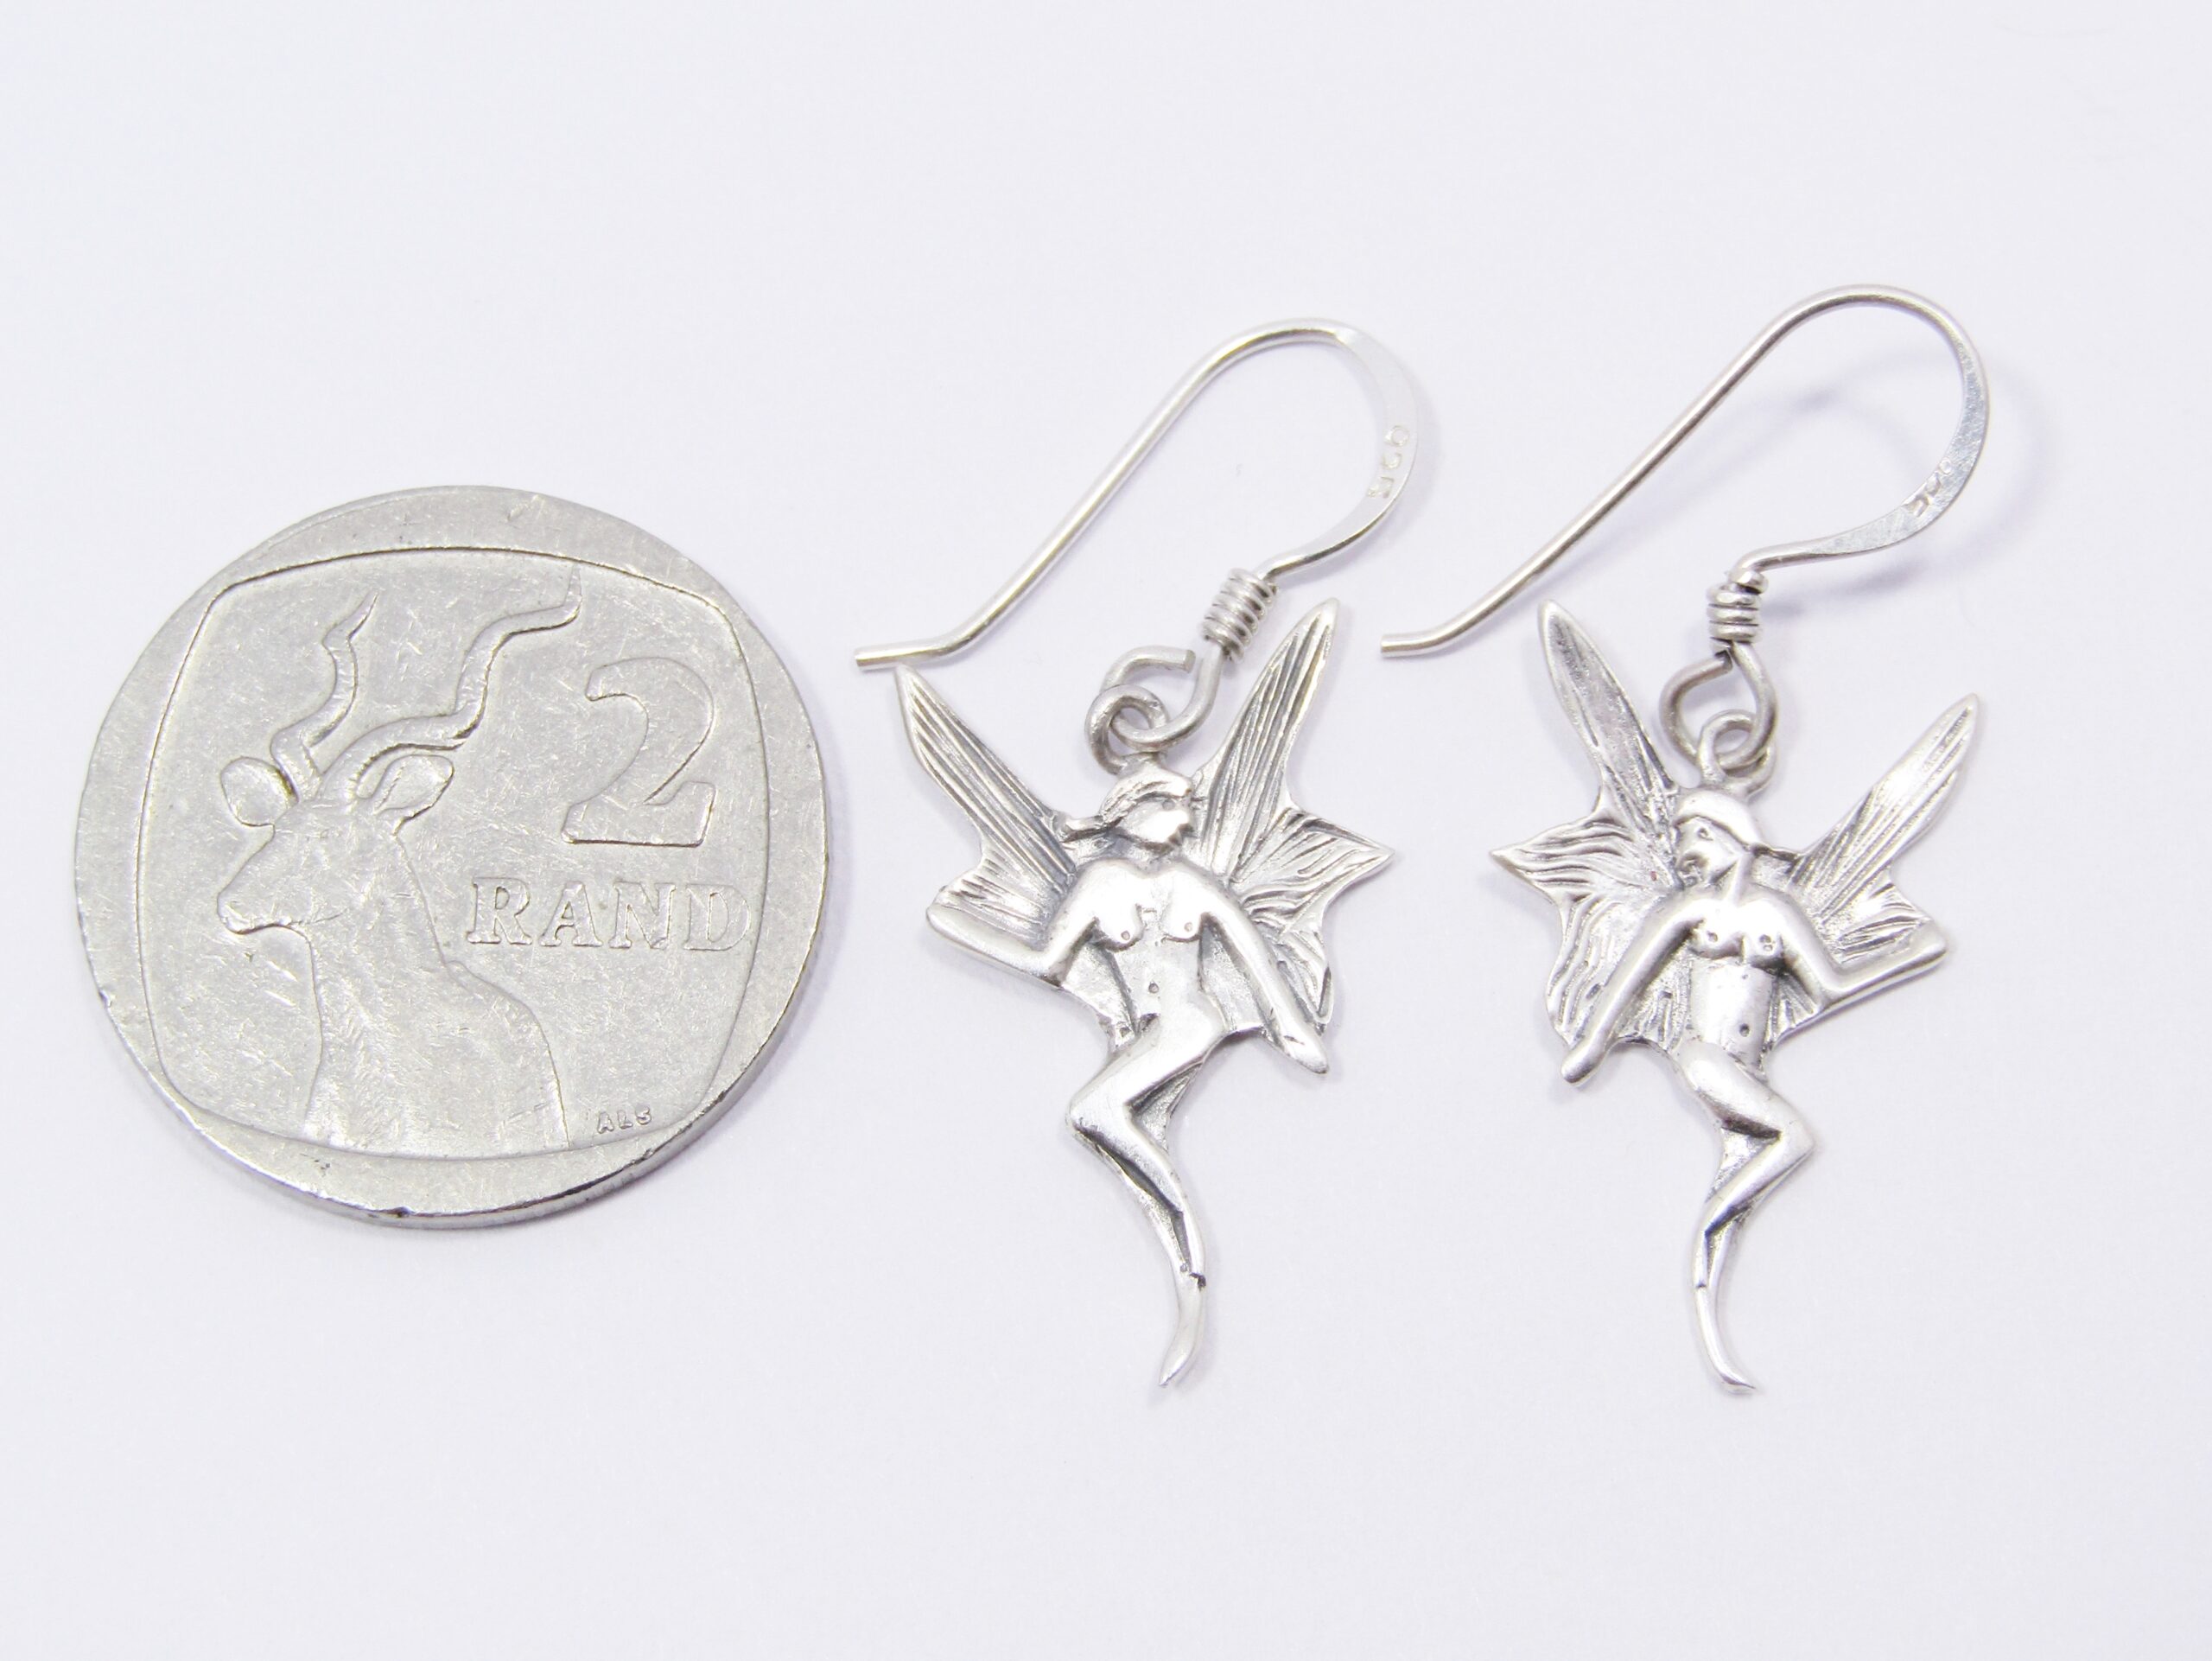 A Gorgeous Pair of Fairy Design Earrings in Sterling Silver.